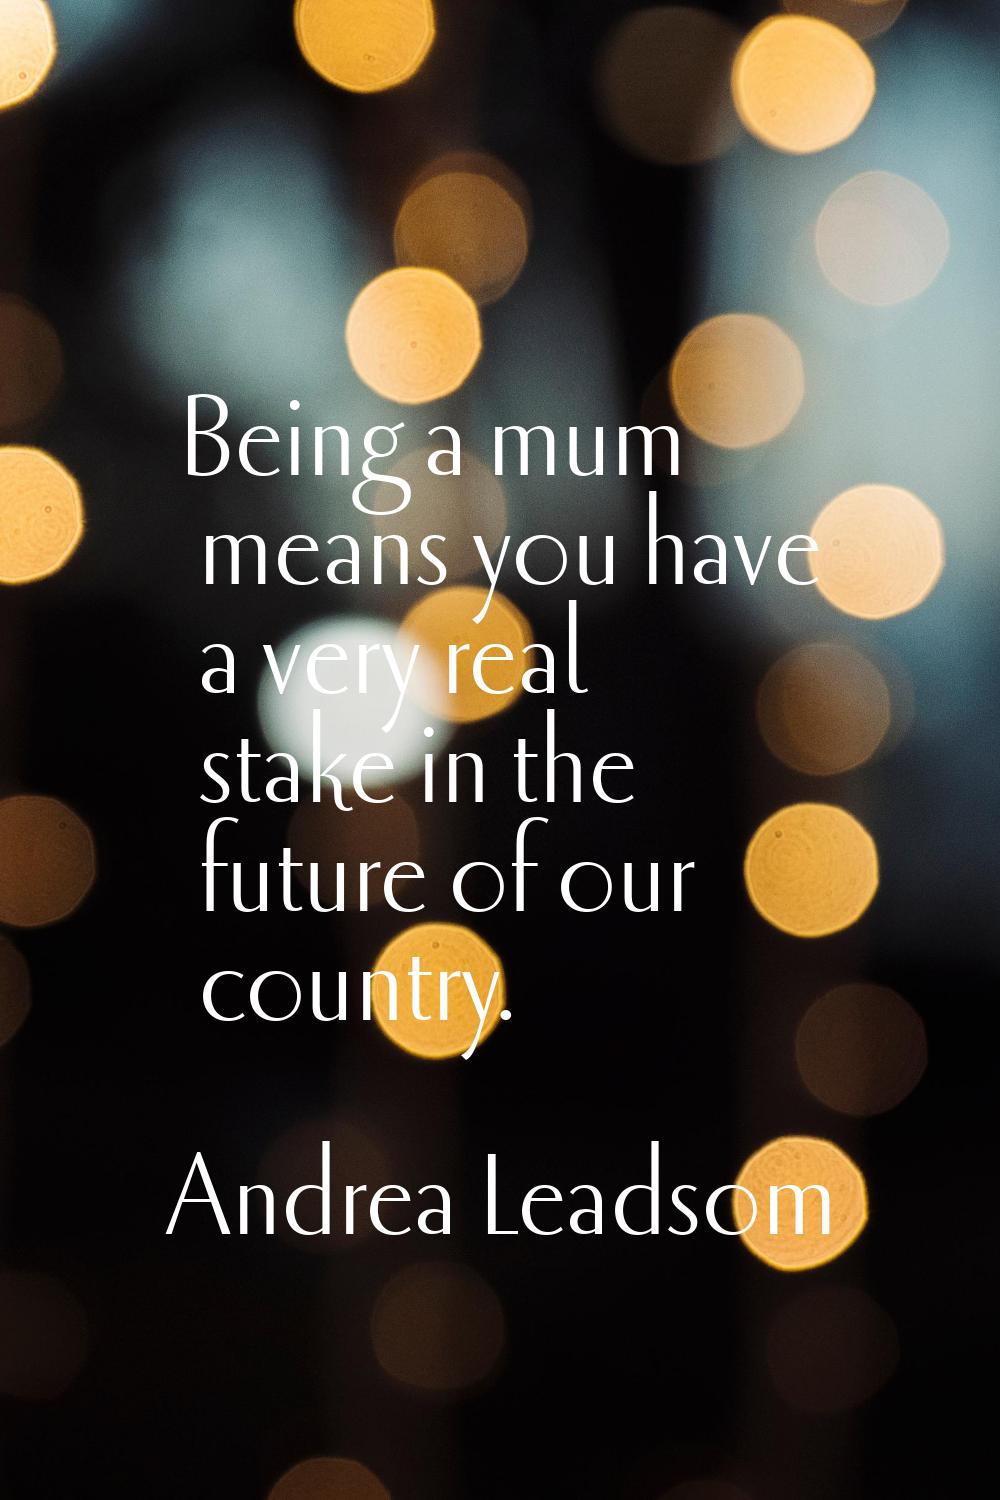 Being a mum means you have a very real stake in the future of our country.